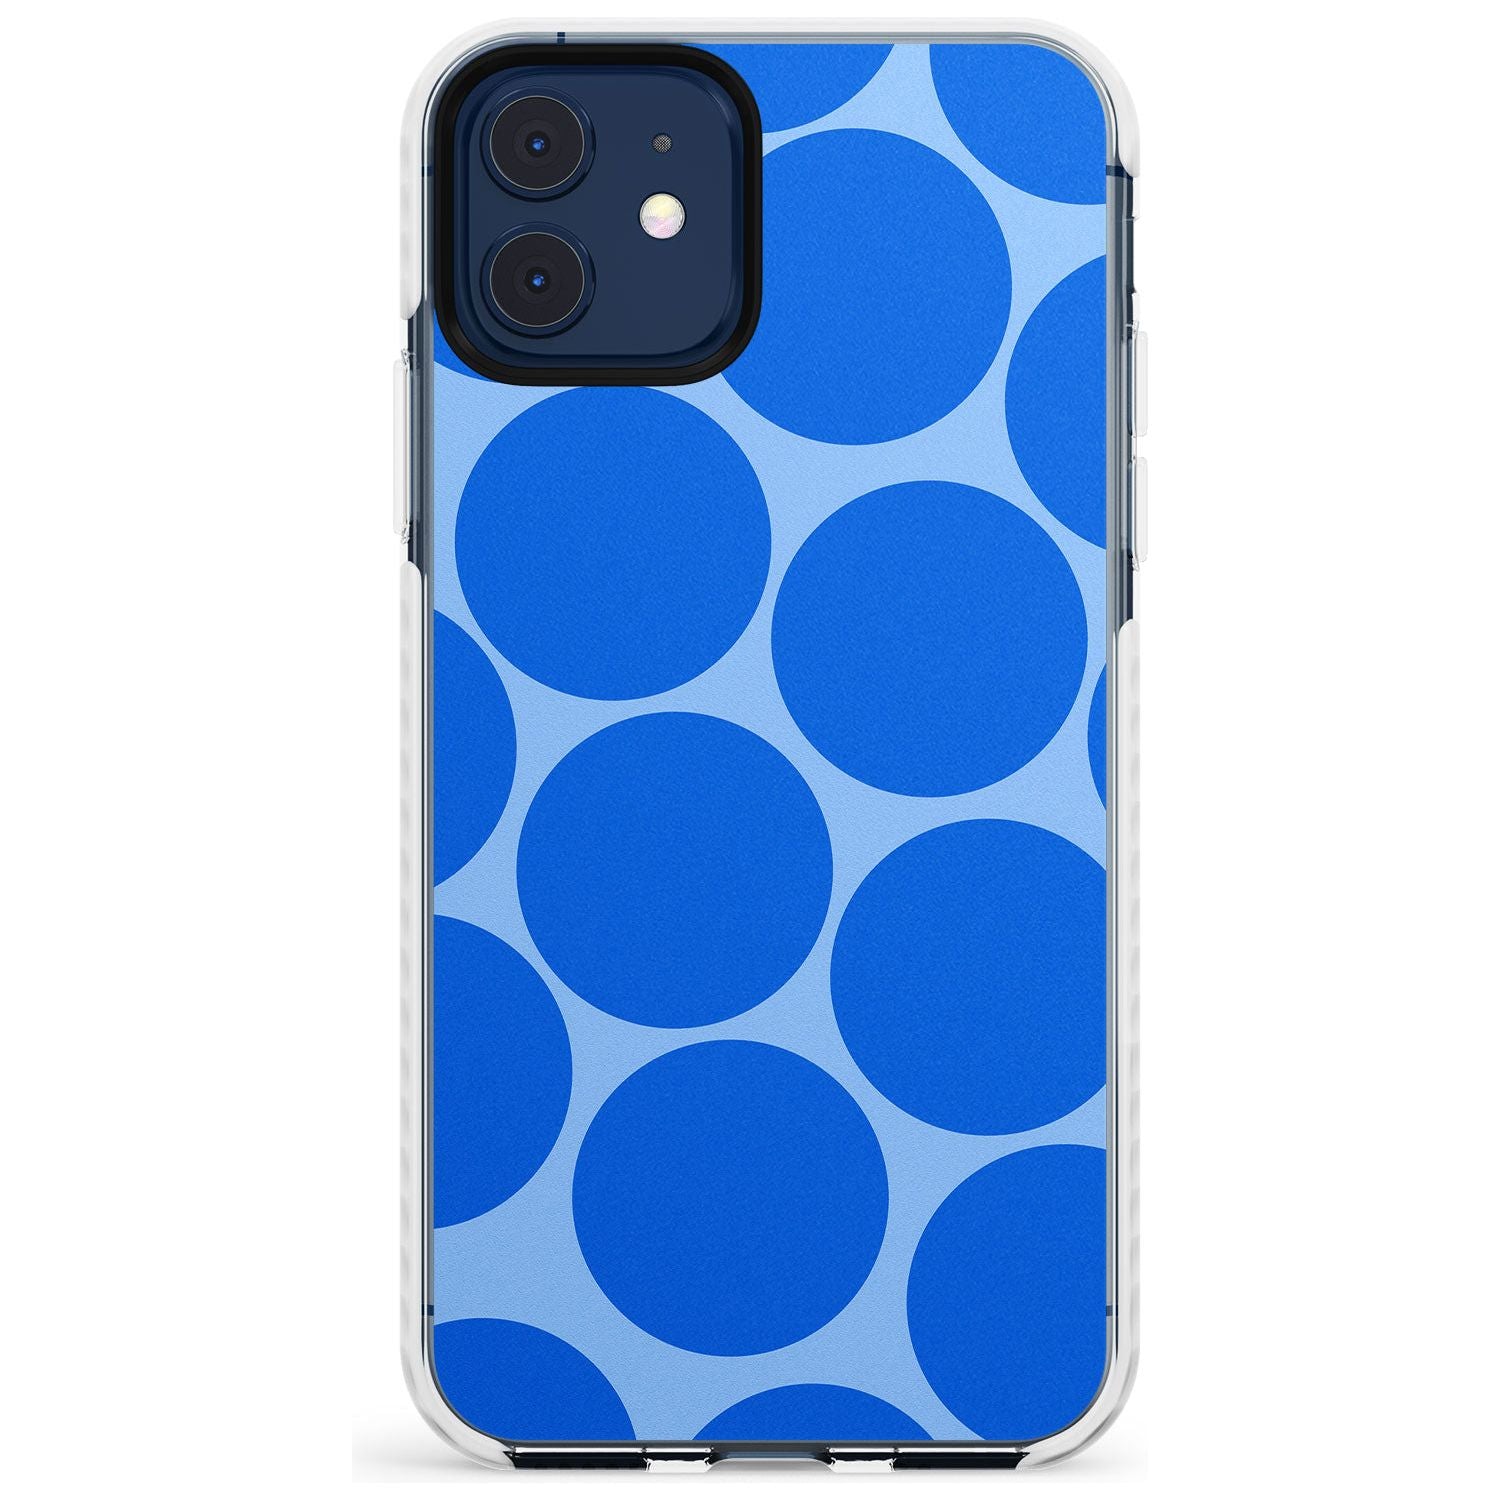 Abstract Retro Shapes: Blue Dots Slim TPU Phone Case for iPhone 11